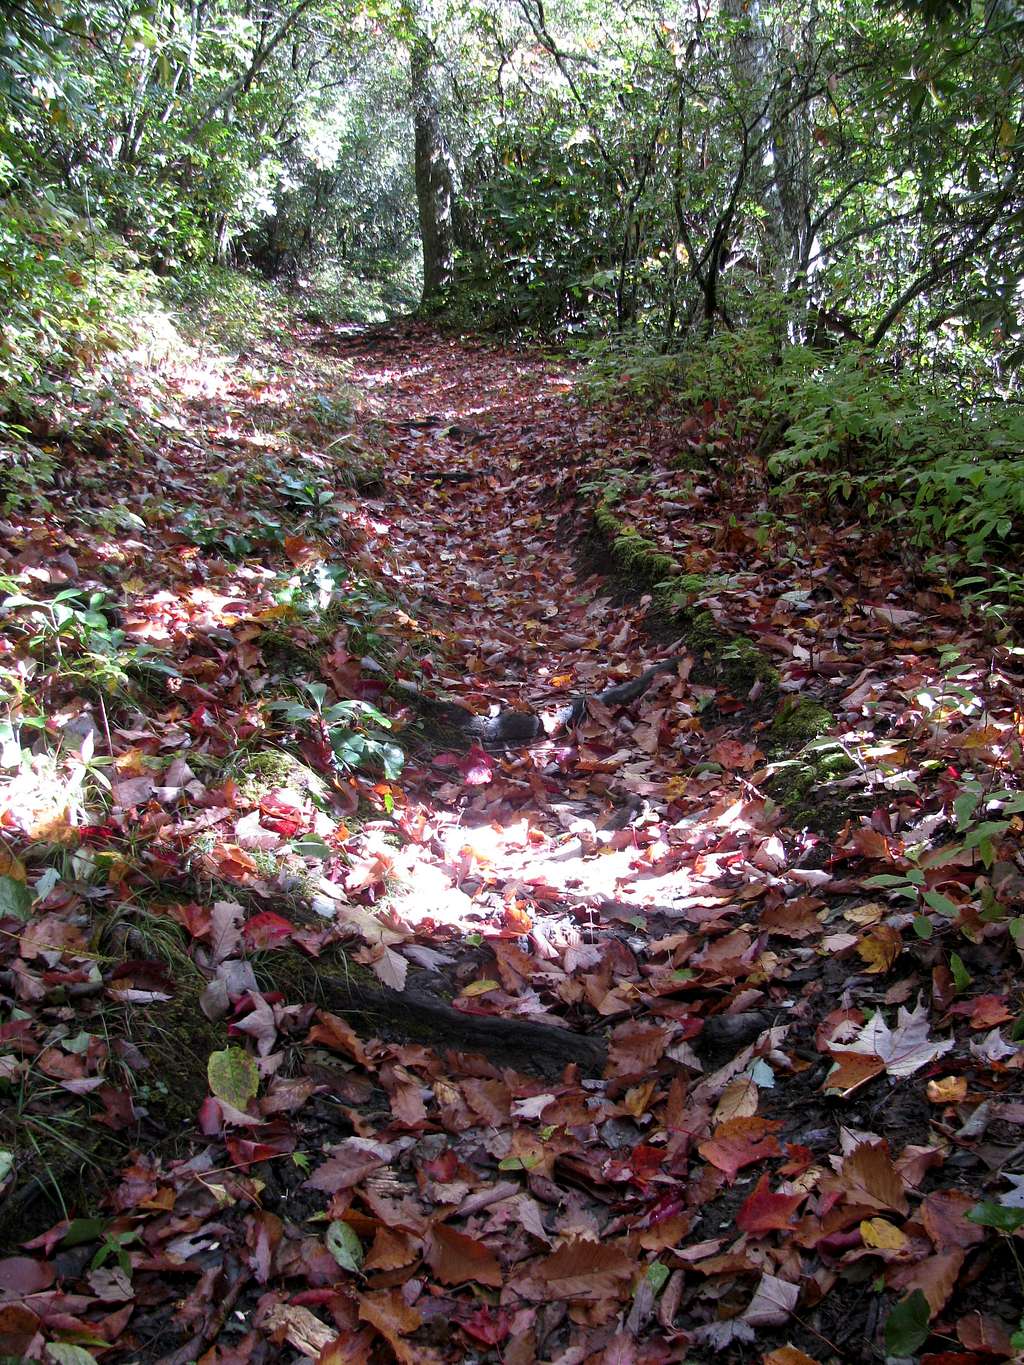 A Carpet of Leaves on the Miry Ridge Trail